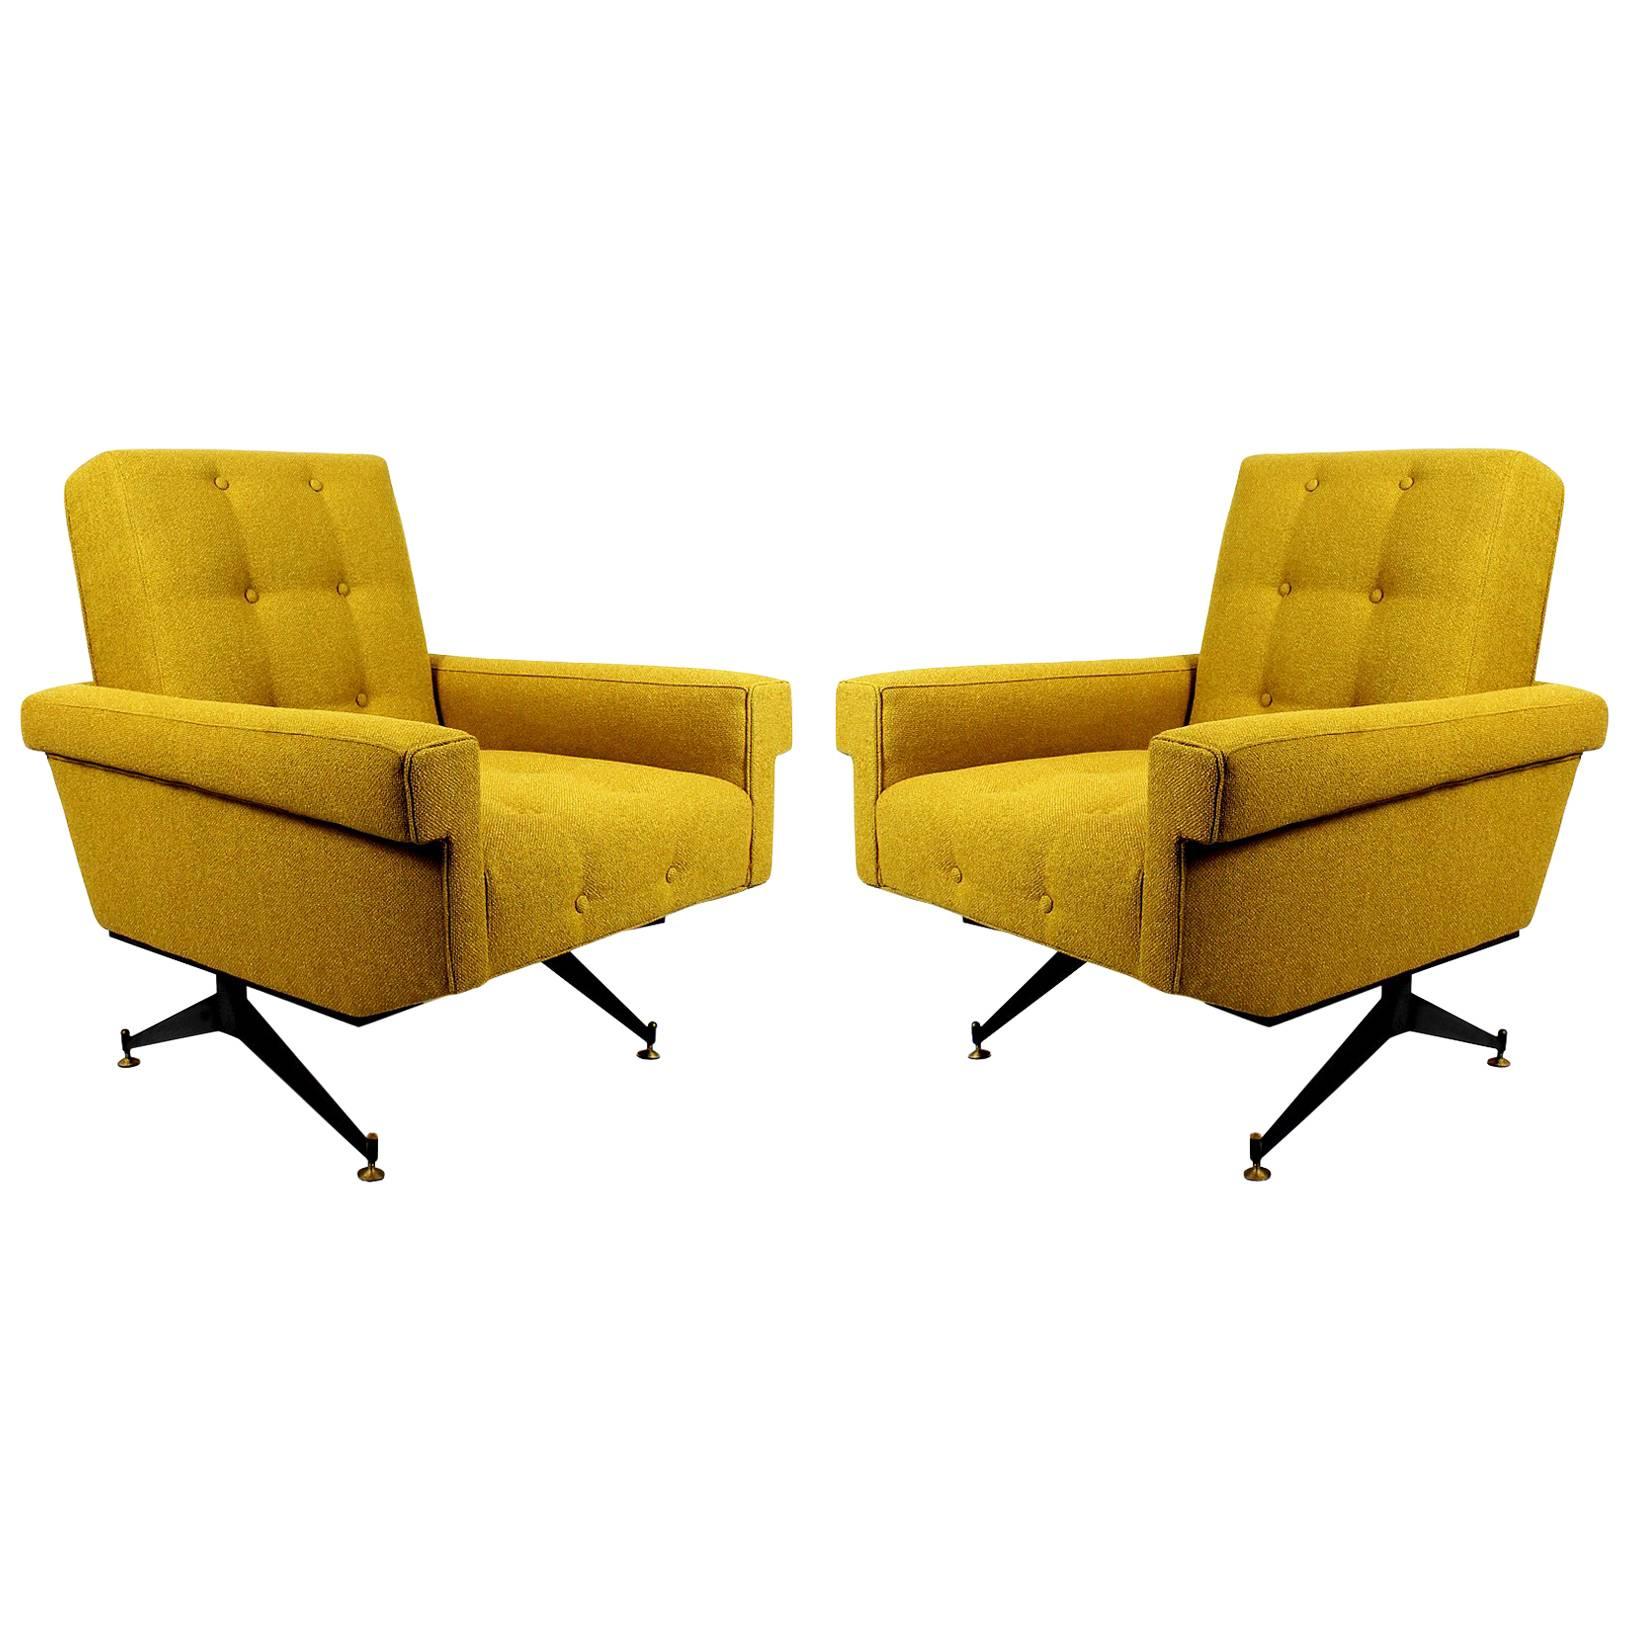 1960s Pair of Padded Armchairs, Yellow and Black, Steel, Upholstery, Italy